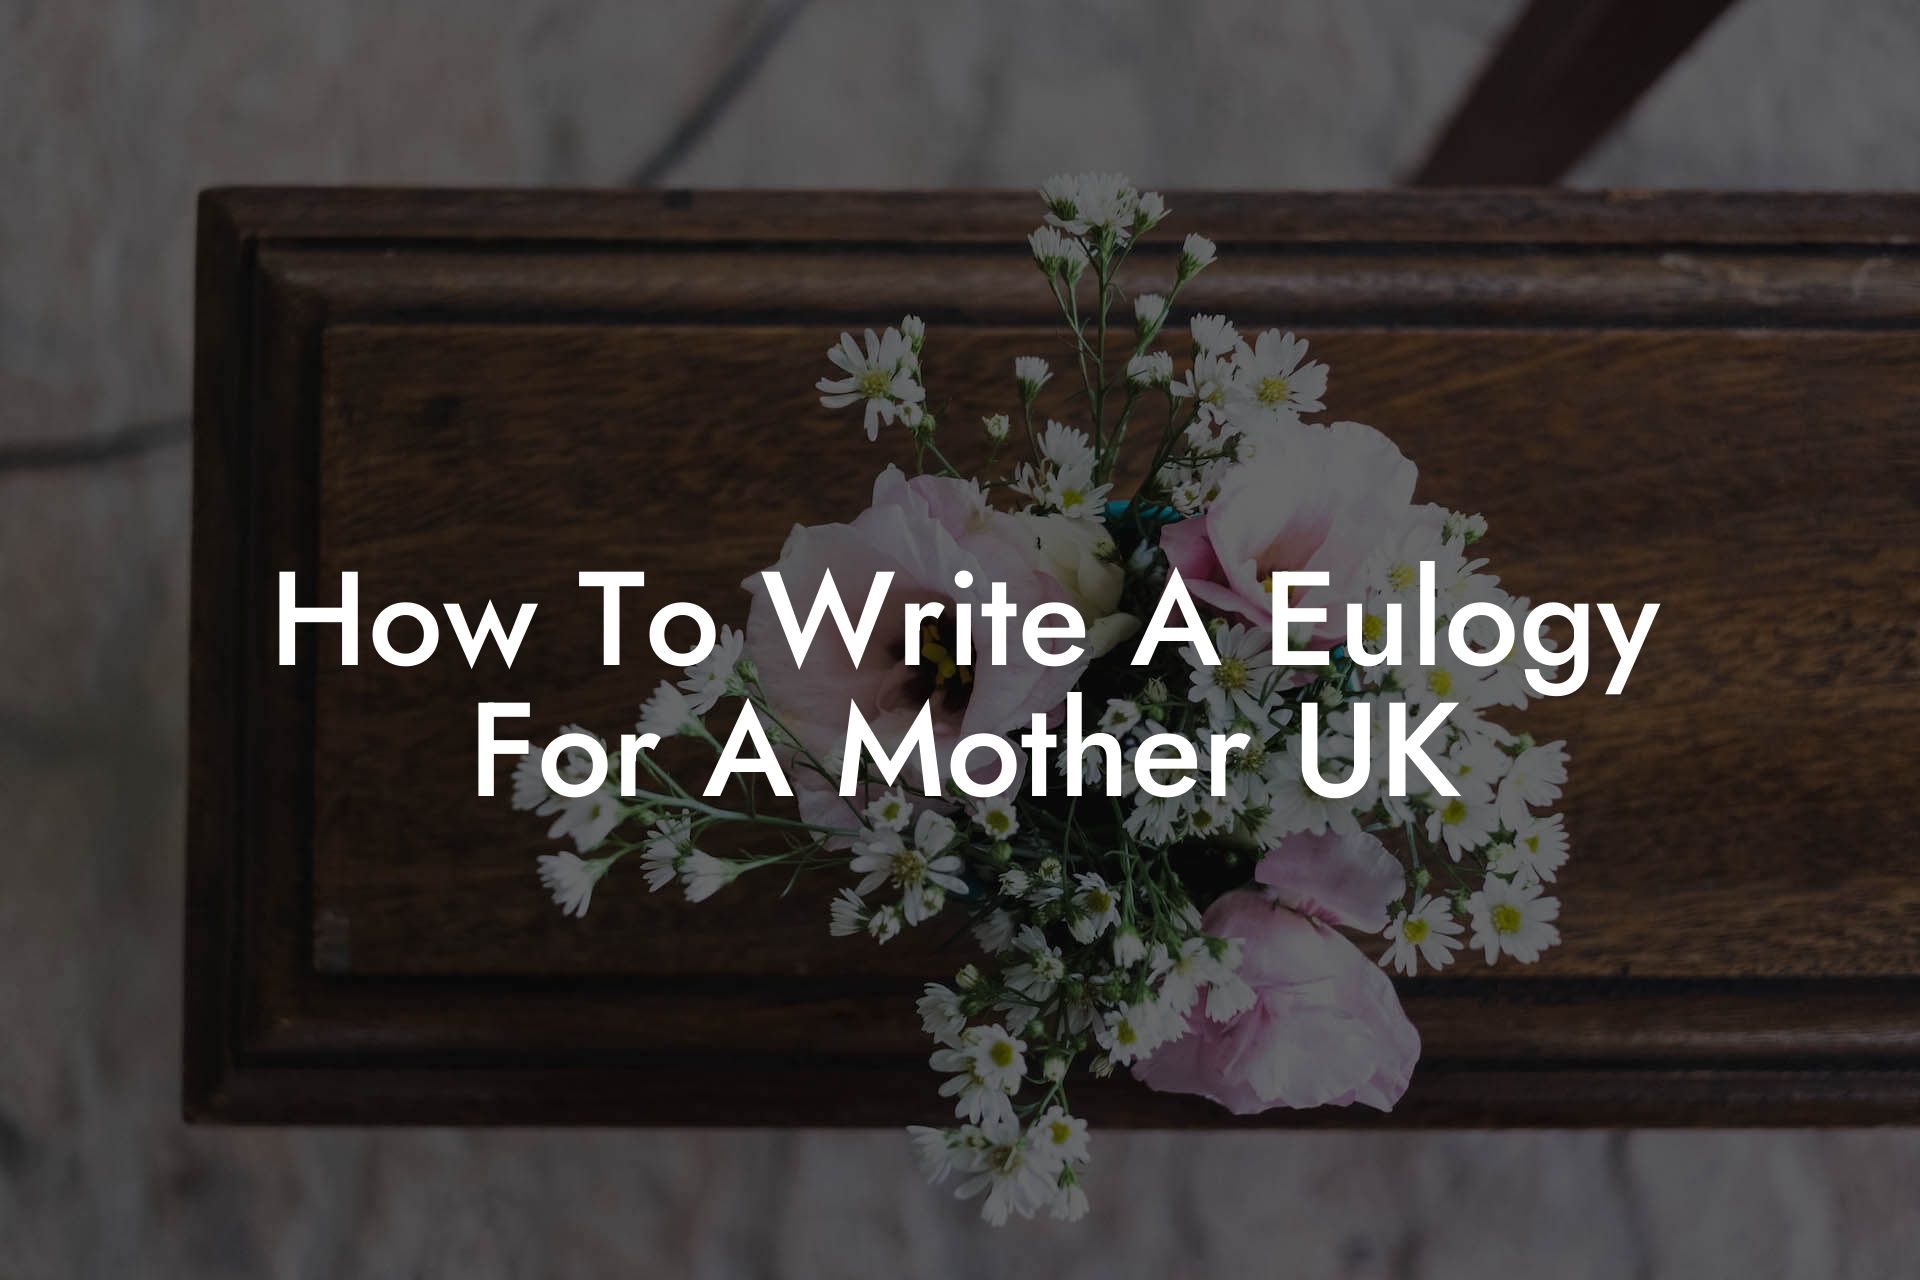 How To Write A Eulogy For A Mother UK